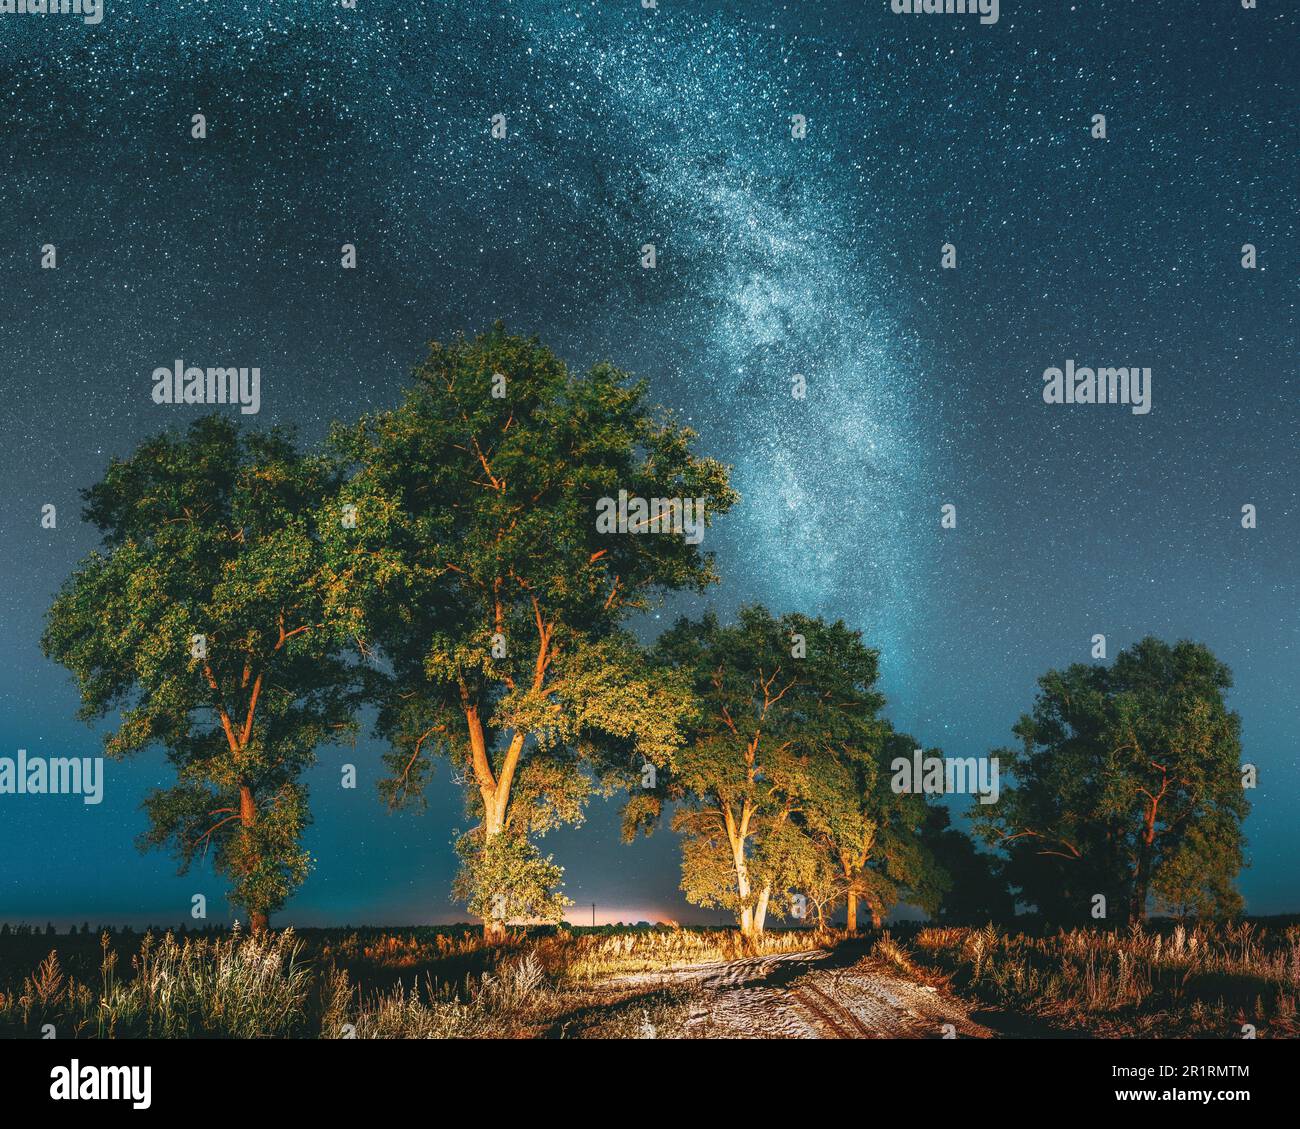 Panorama Milky Way Galaxy In Night Starry Sky Above Trees In Summer Forest. Glowing Stars Above Landscape. View From Europe. Stock Photo